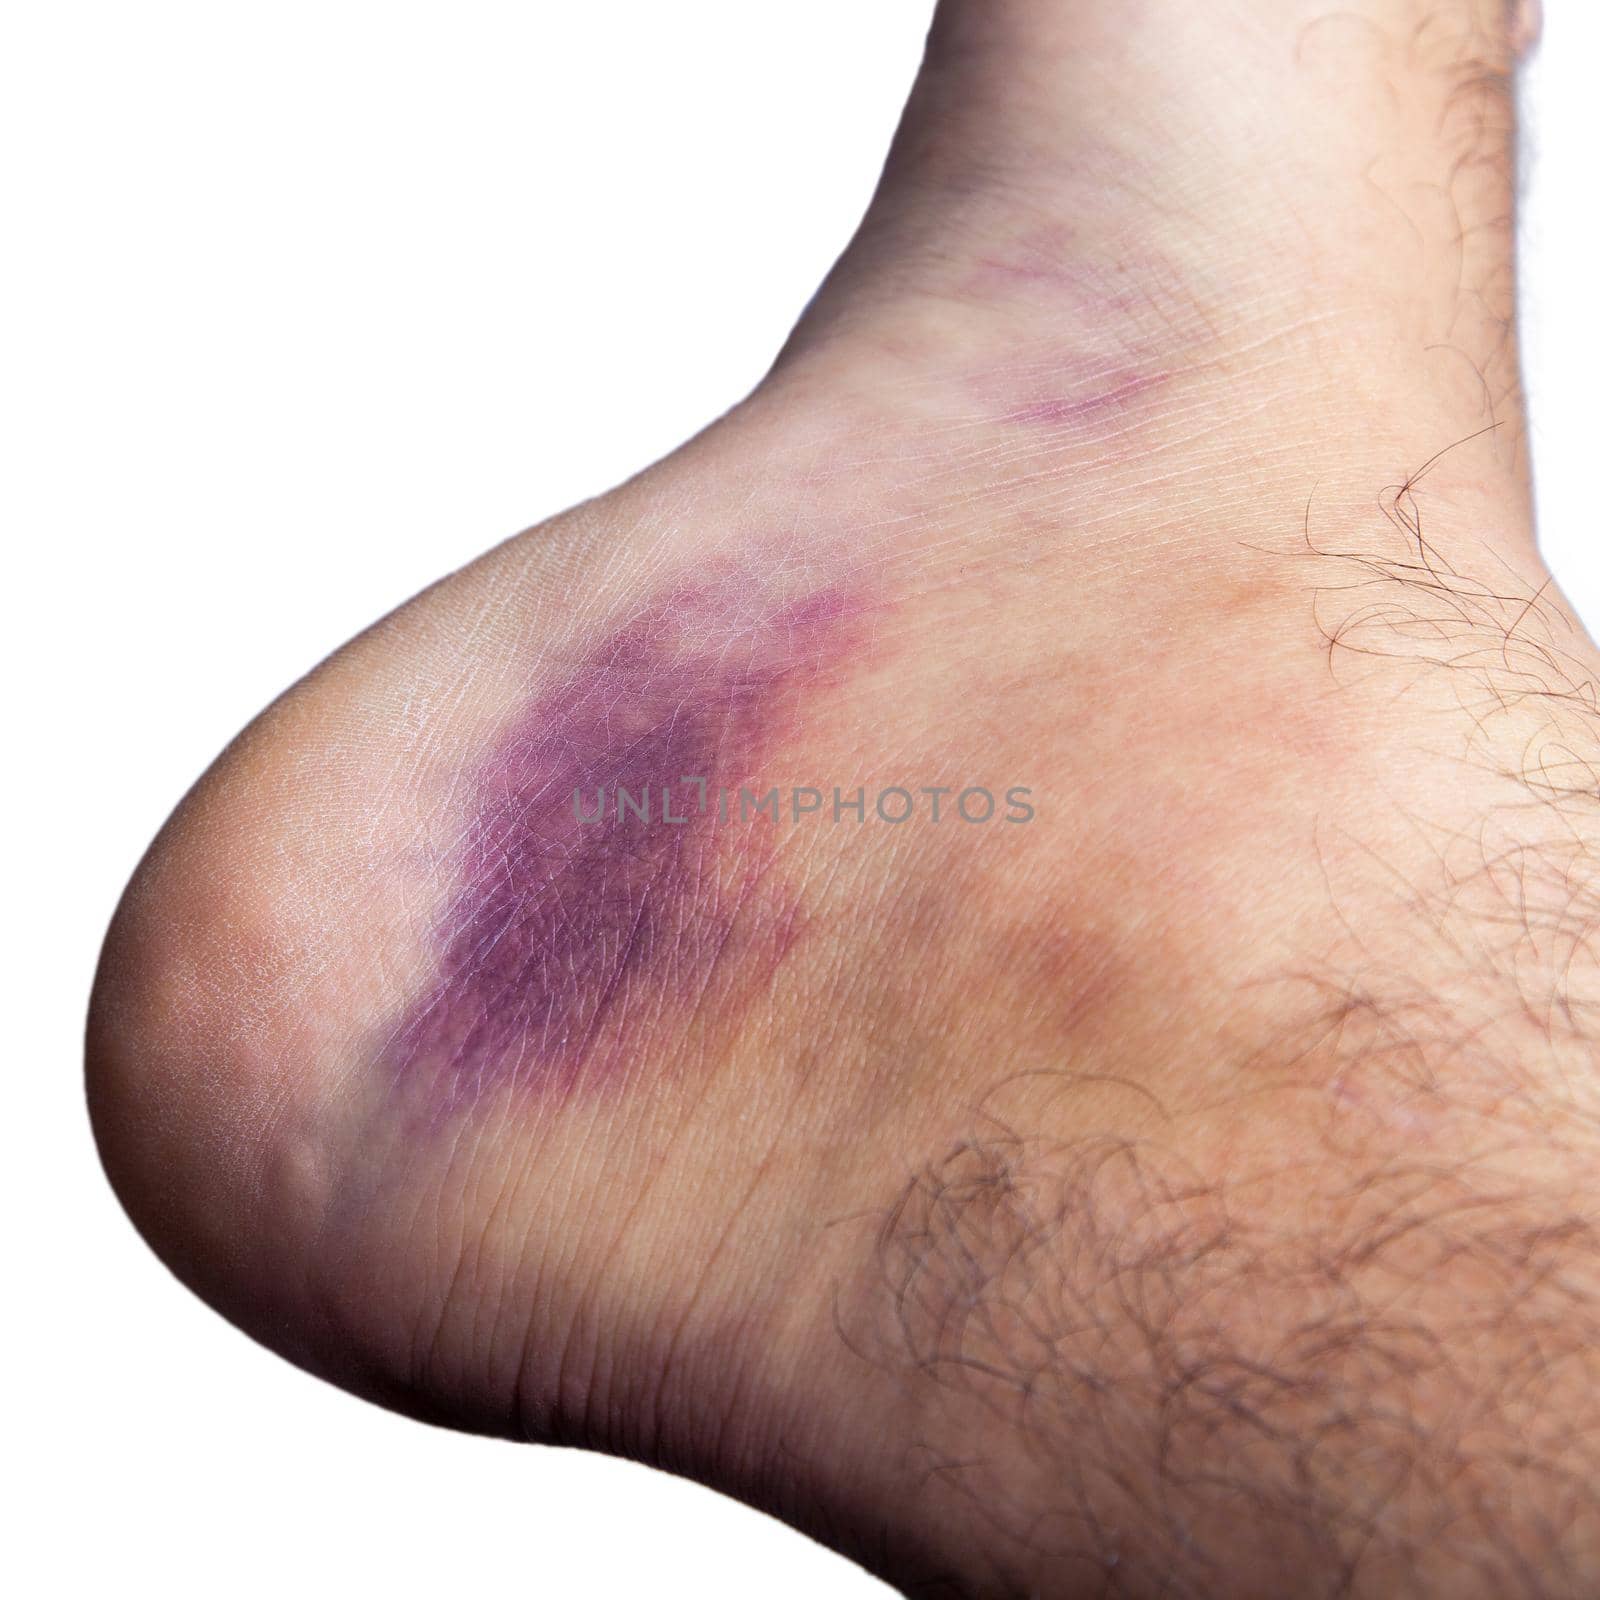 Bruised ankle after tripping over and twisting by Khosro1